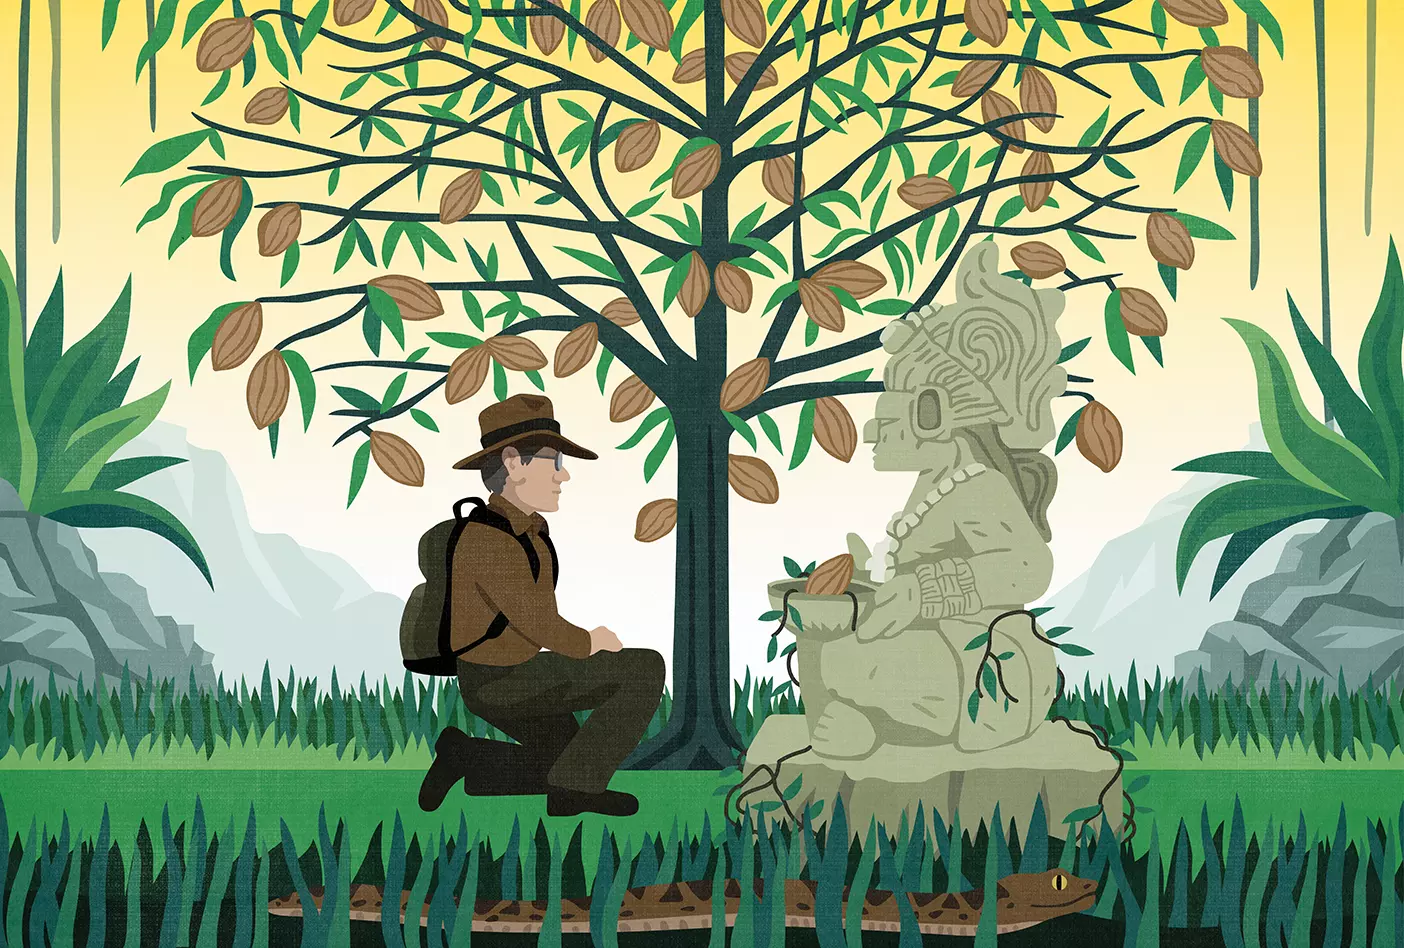 An illustration of a professor with a backpack and adventuring hat approaches a Maya statue with a cacao tree in the background.